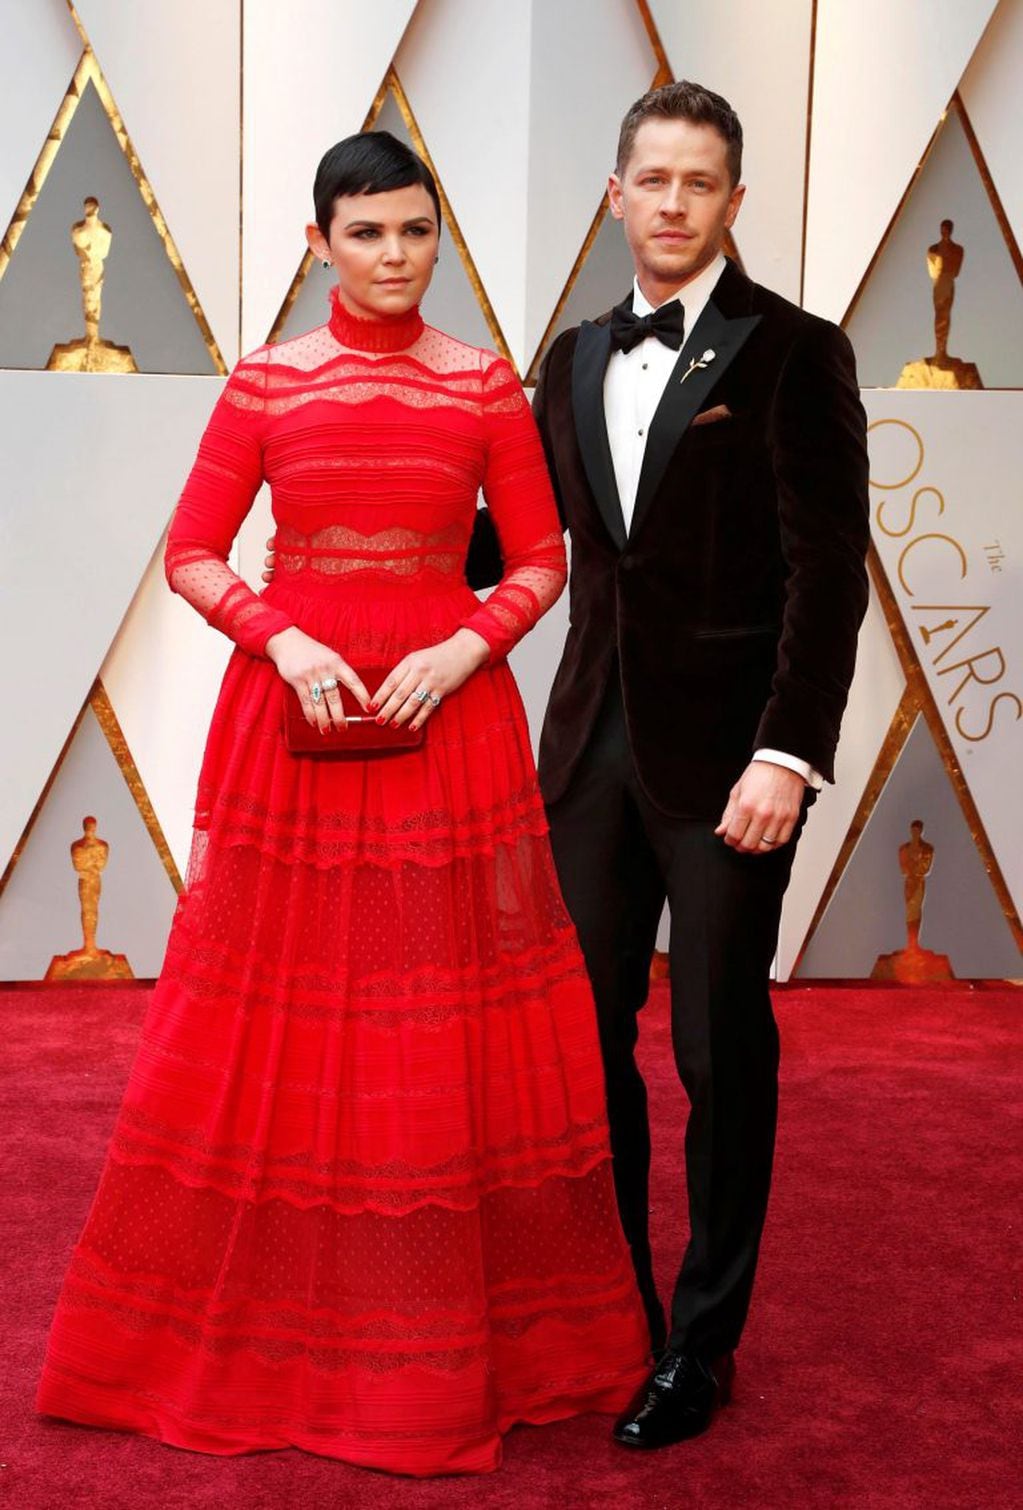 AJB001. Hollywood (United States), 26/02/2017.- Ginnifer Goodwin (L) and Josh Dallas arrive for the 89th annual Academy Awards ceremony at the Dolby Theatre in Hollywood, California, USA, 26 February 2017. The Oscars are presented for outstanding individu